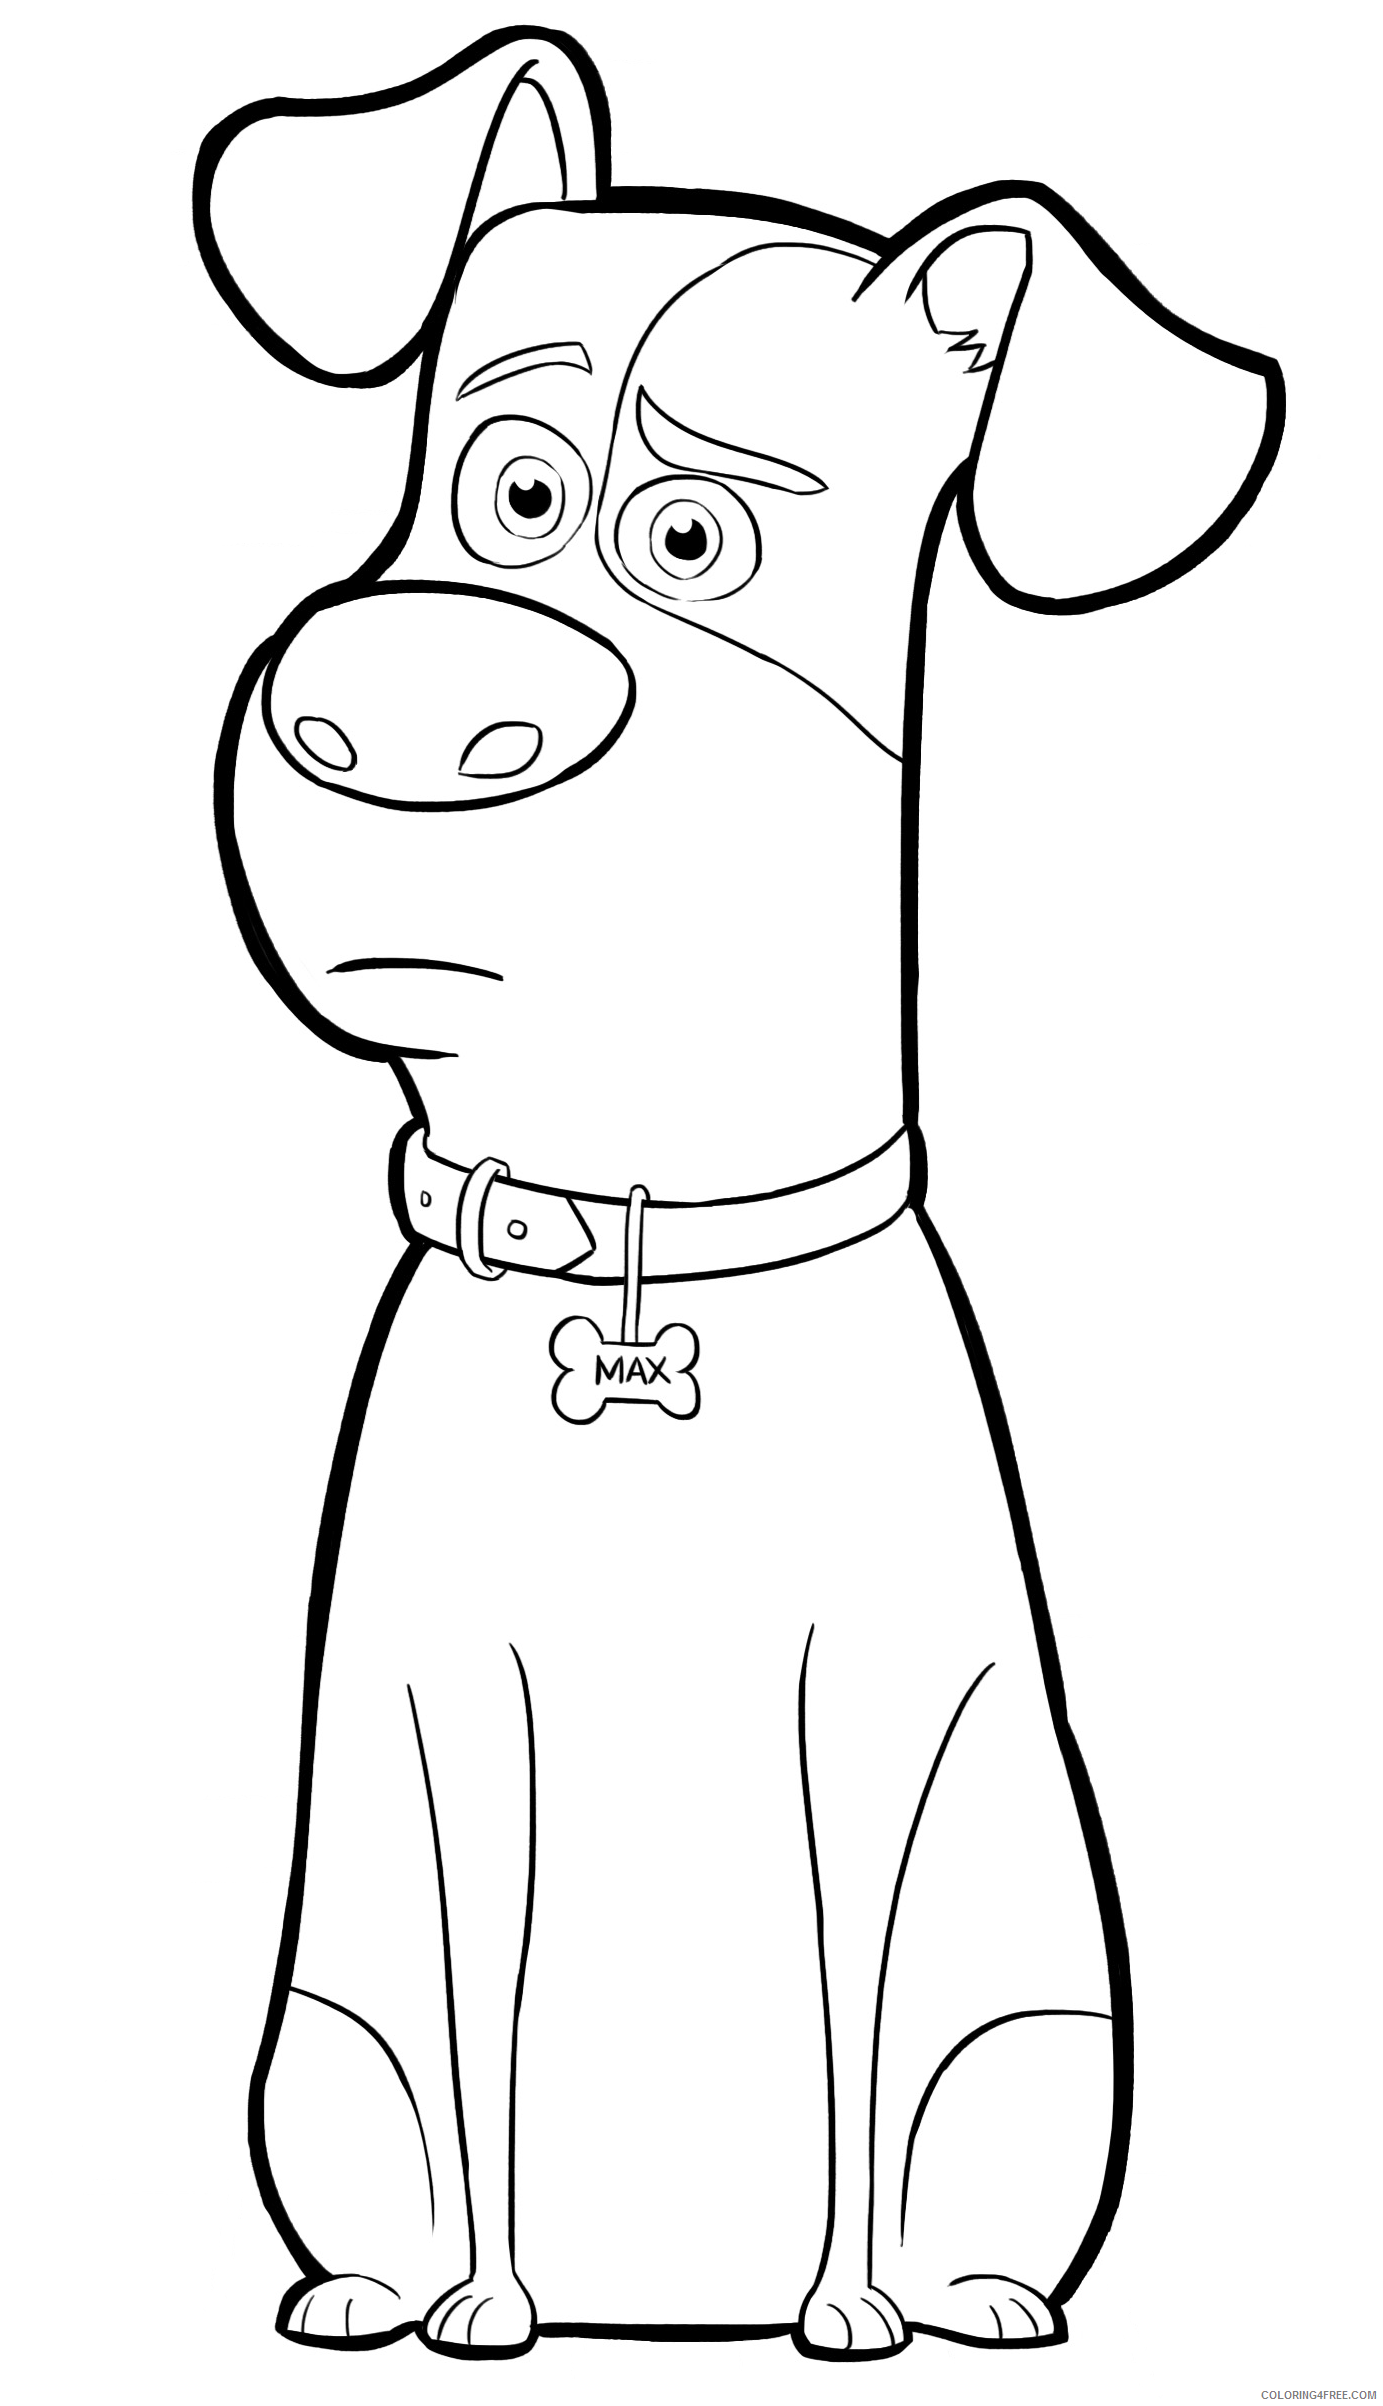 The Secret Life of Pets Coloring Pages TV Film Max Printable 2020 09490 Coloring4free